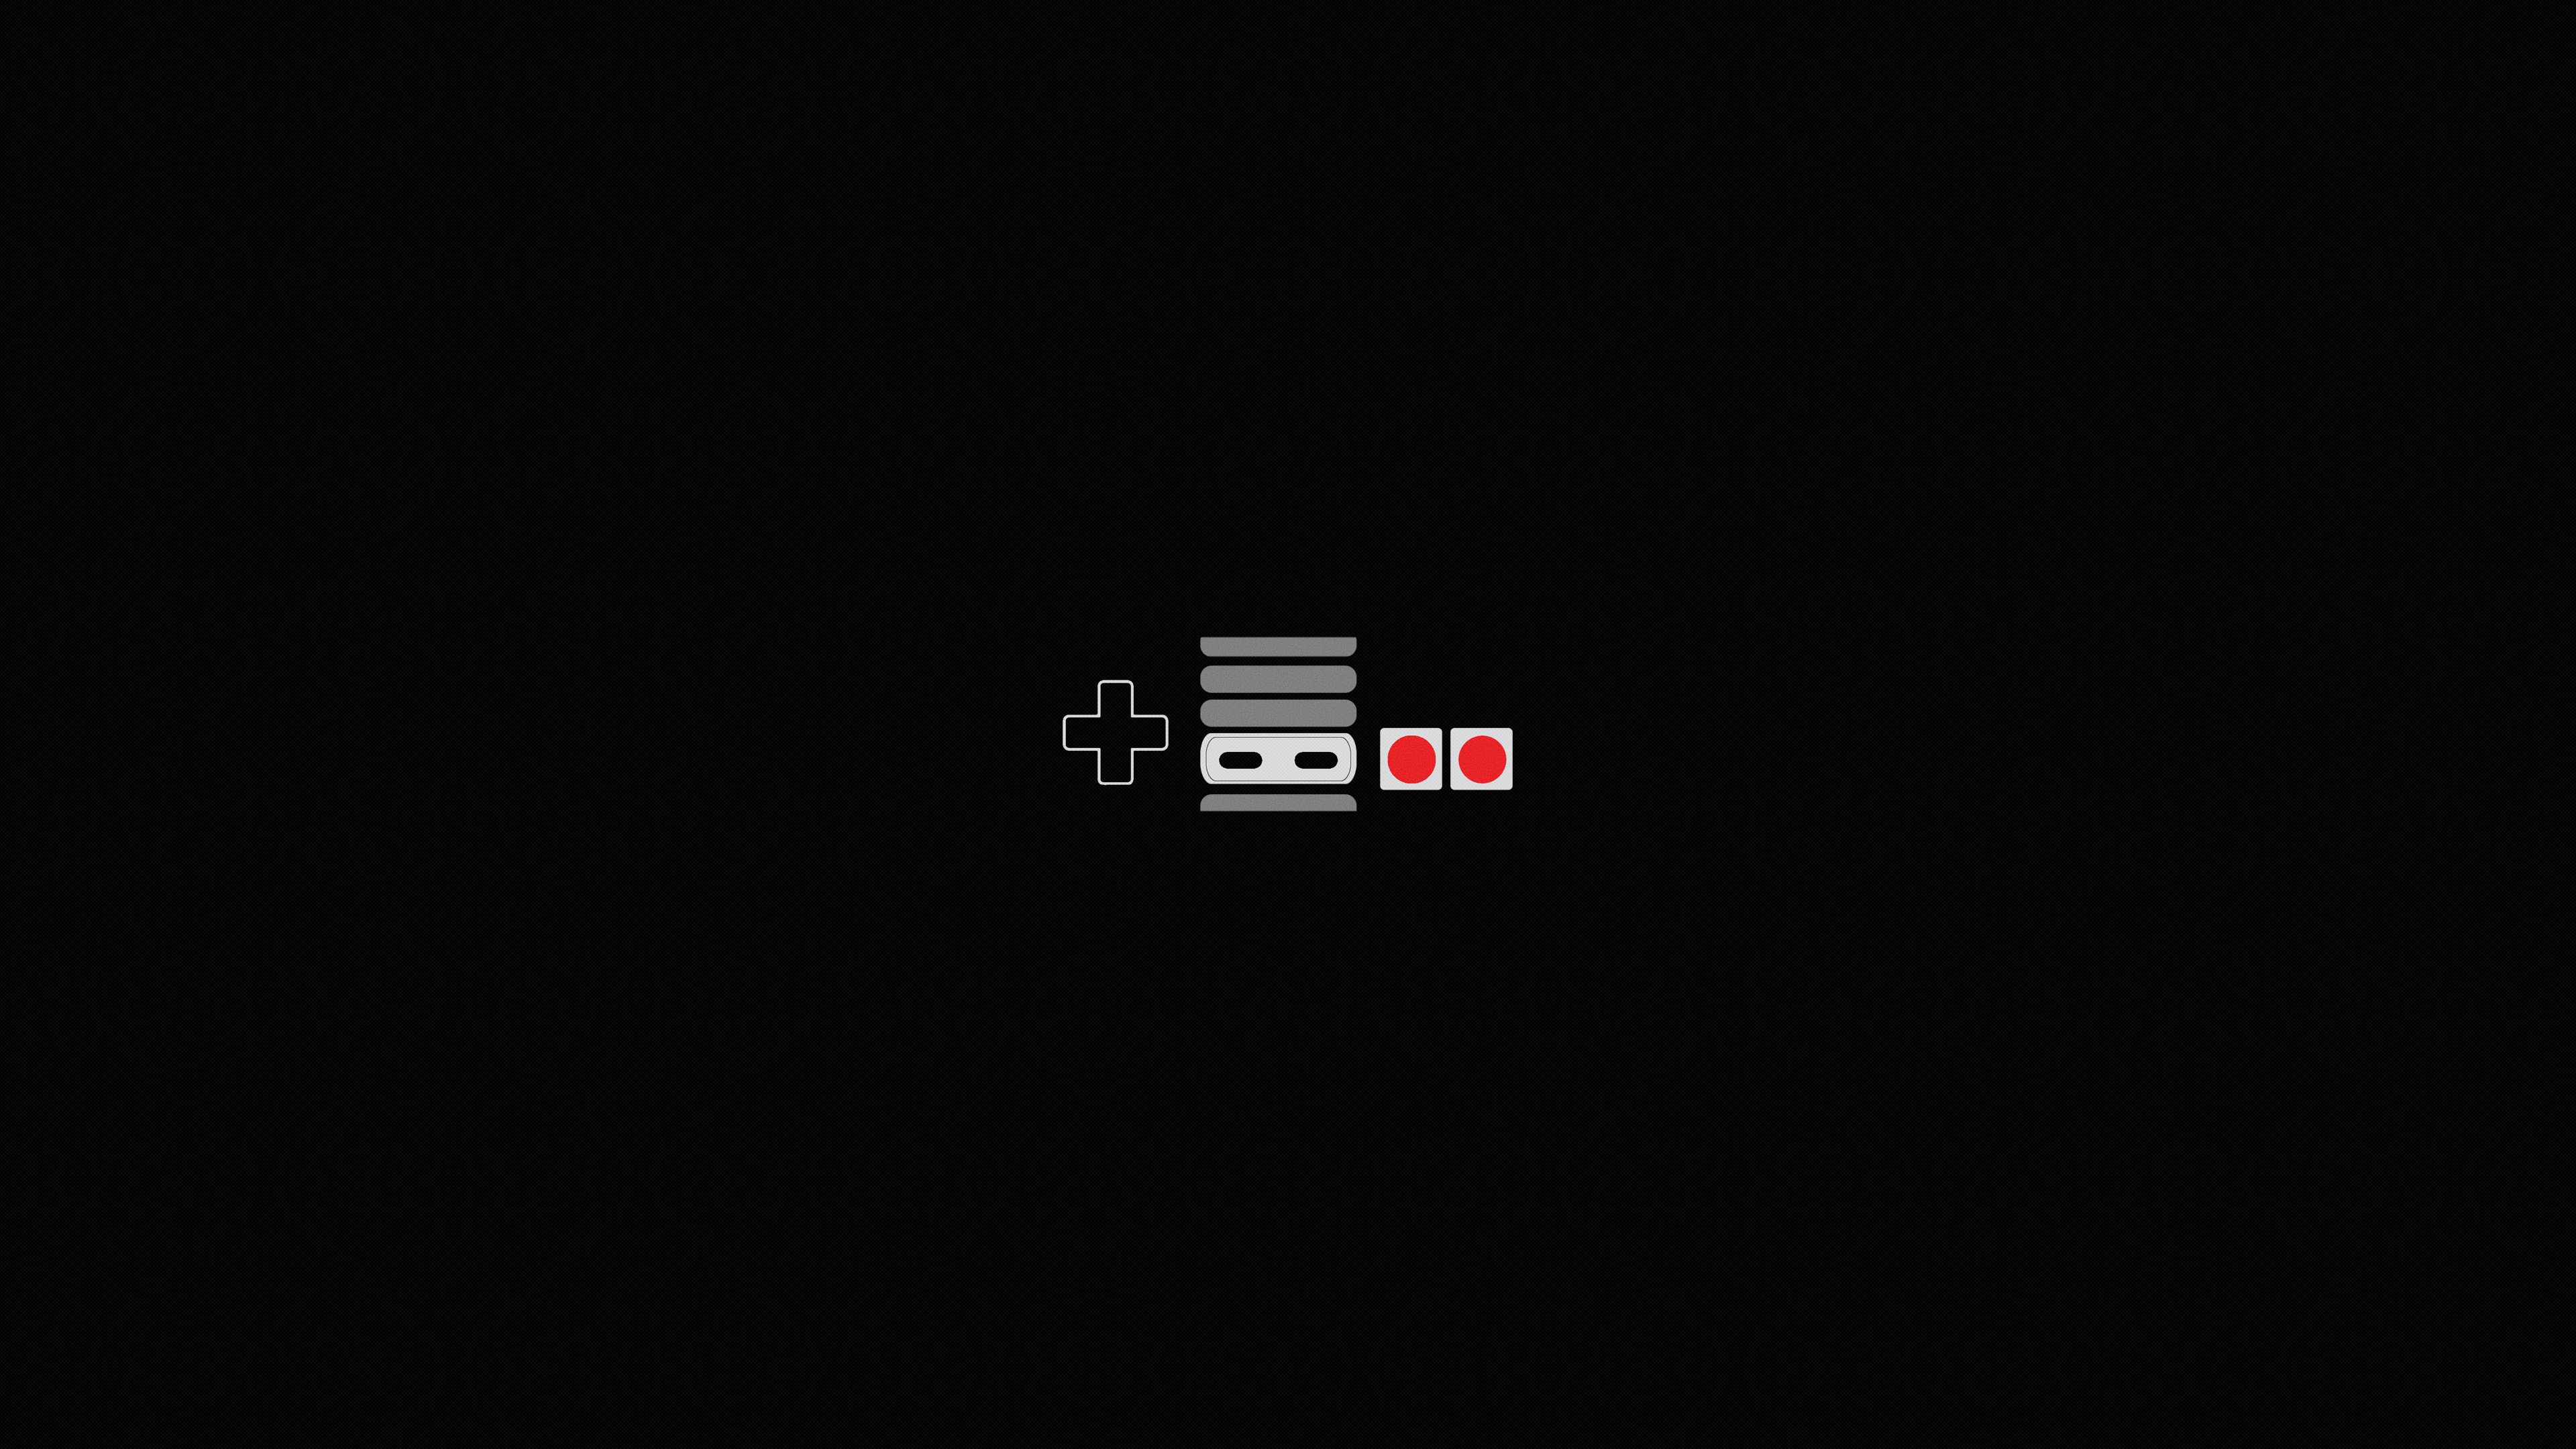 Nintendo Entertainment System Consoles Retro Console Controllers Simple Background Black Background  3840x2160